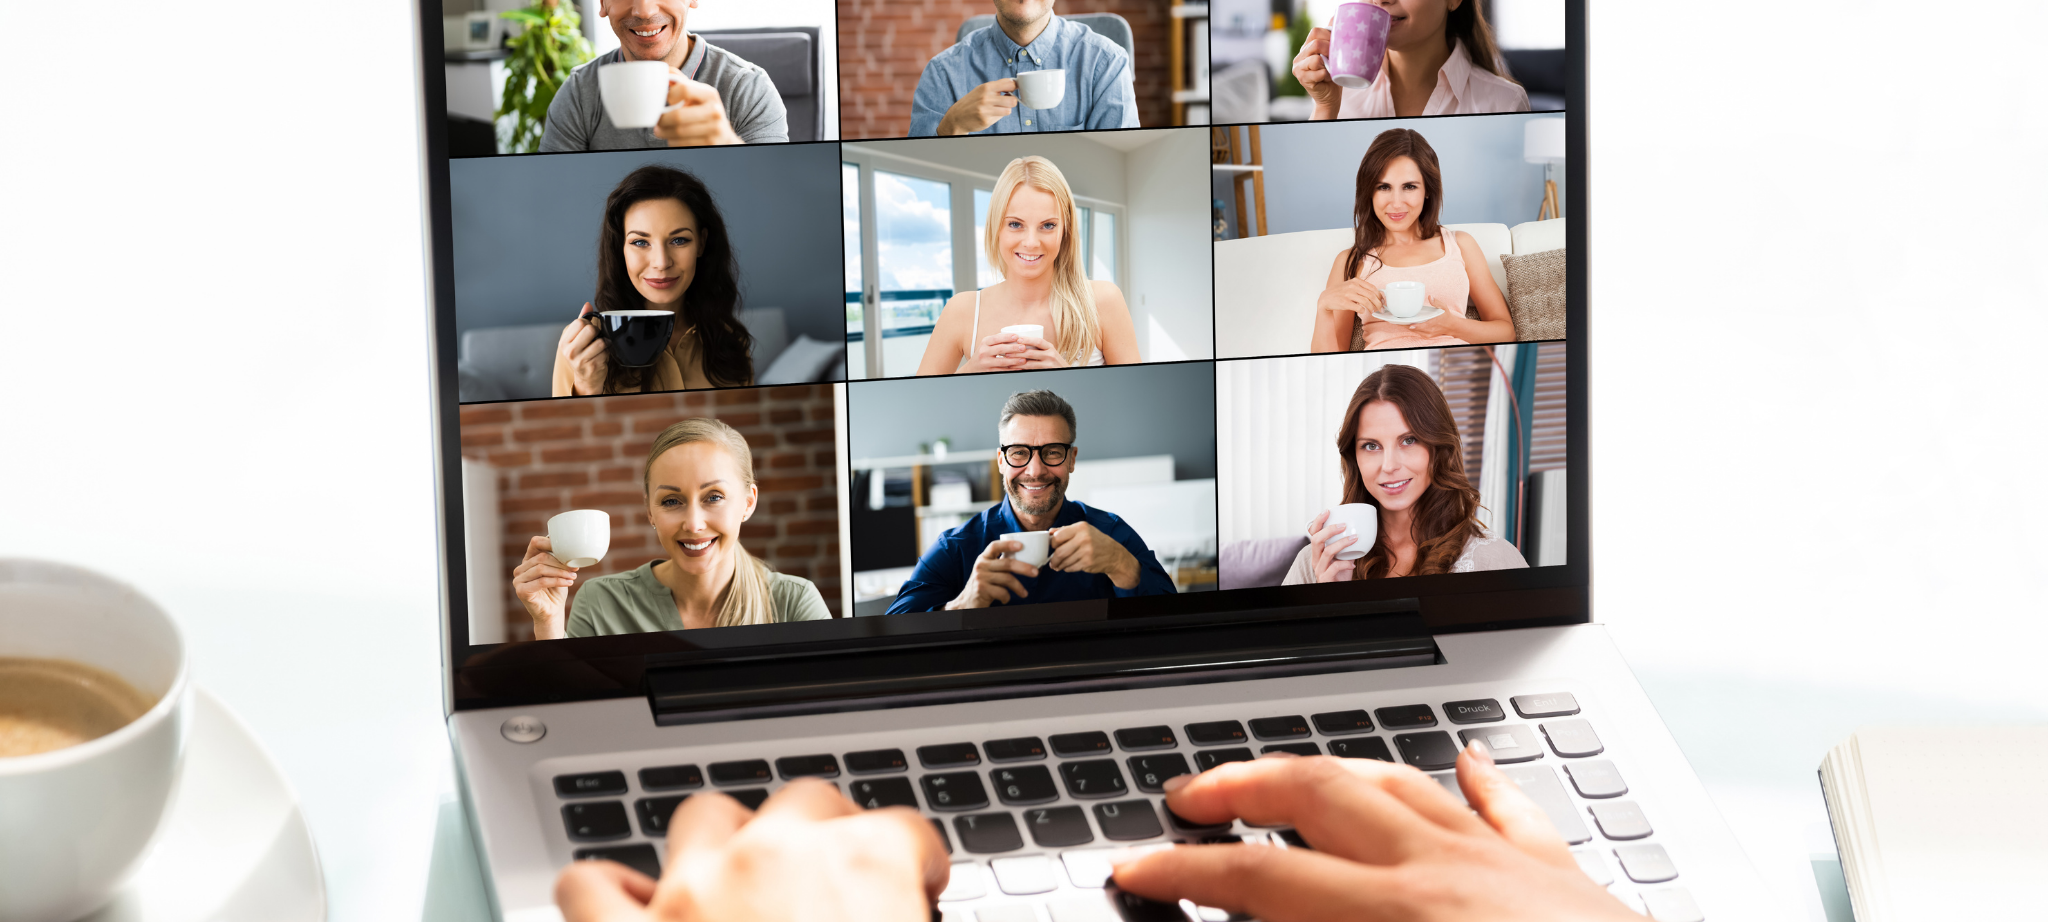 10 Tips to Boost Virtual Meeting Attendance